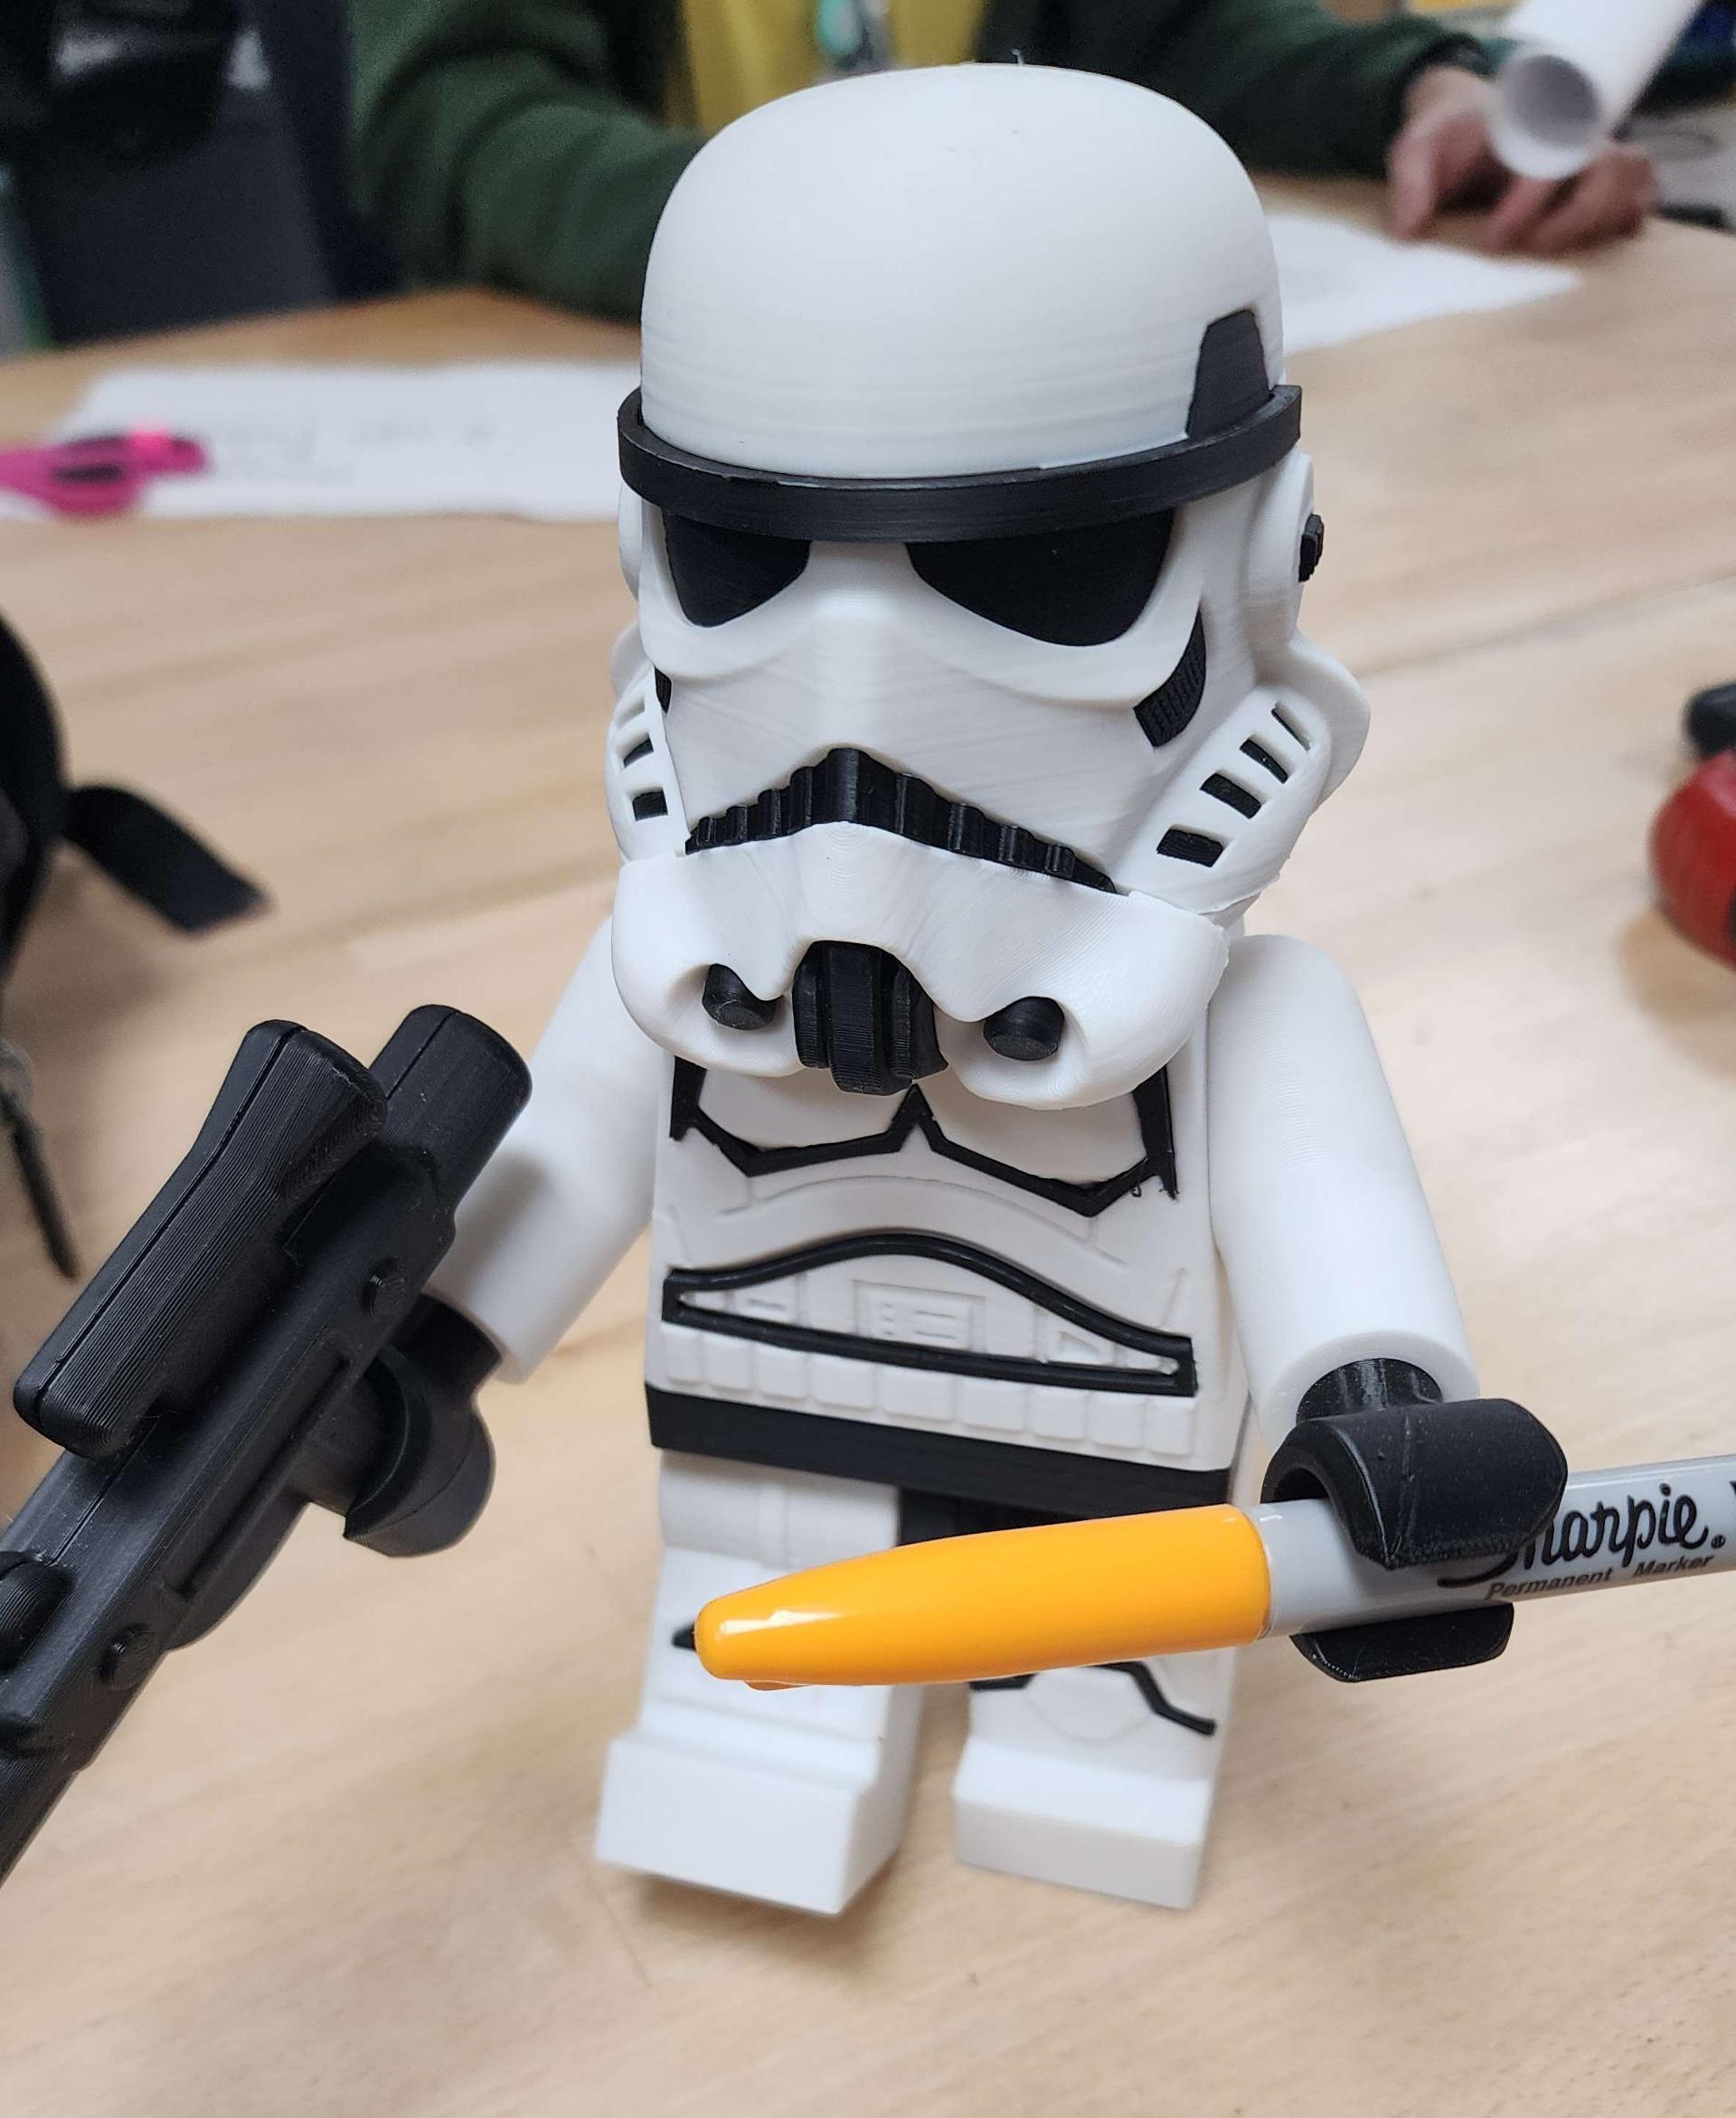 Stormtrooper (6:1 LEGO-inspired brick figure, NO MMU/AMS, NO supports, NO glue) - Banana-colored Sharpie for scale - 3d model